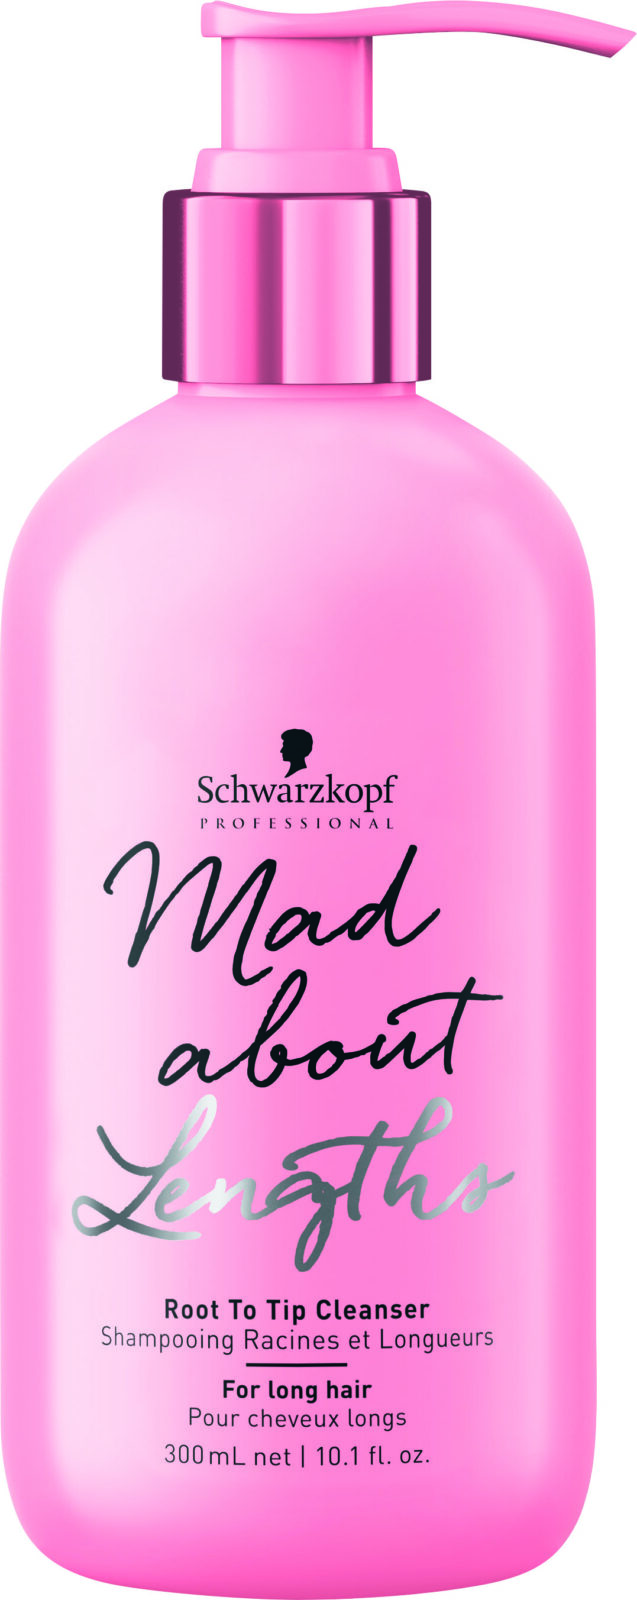 Mad About_Root To Tip Cleanser